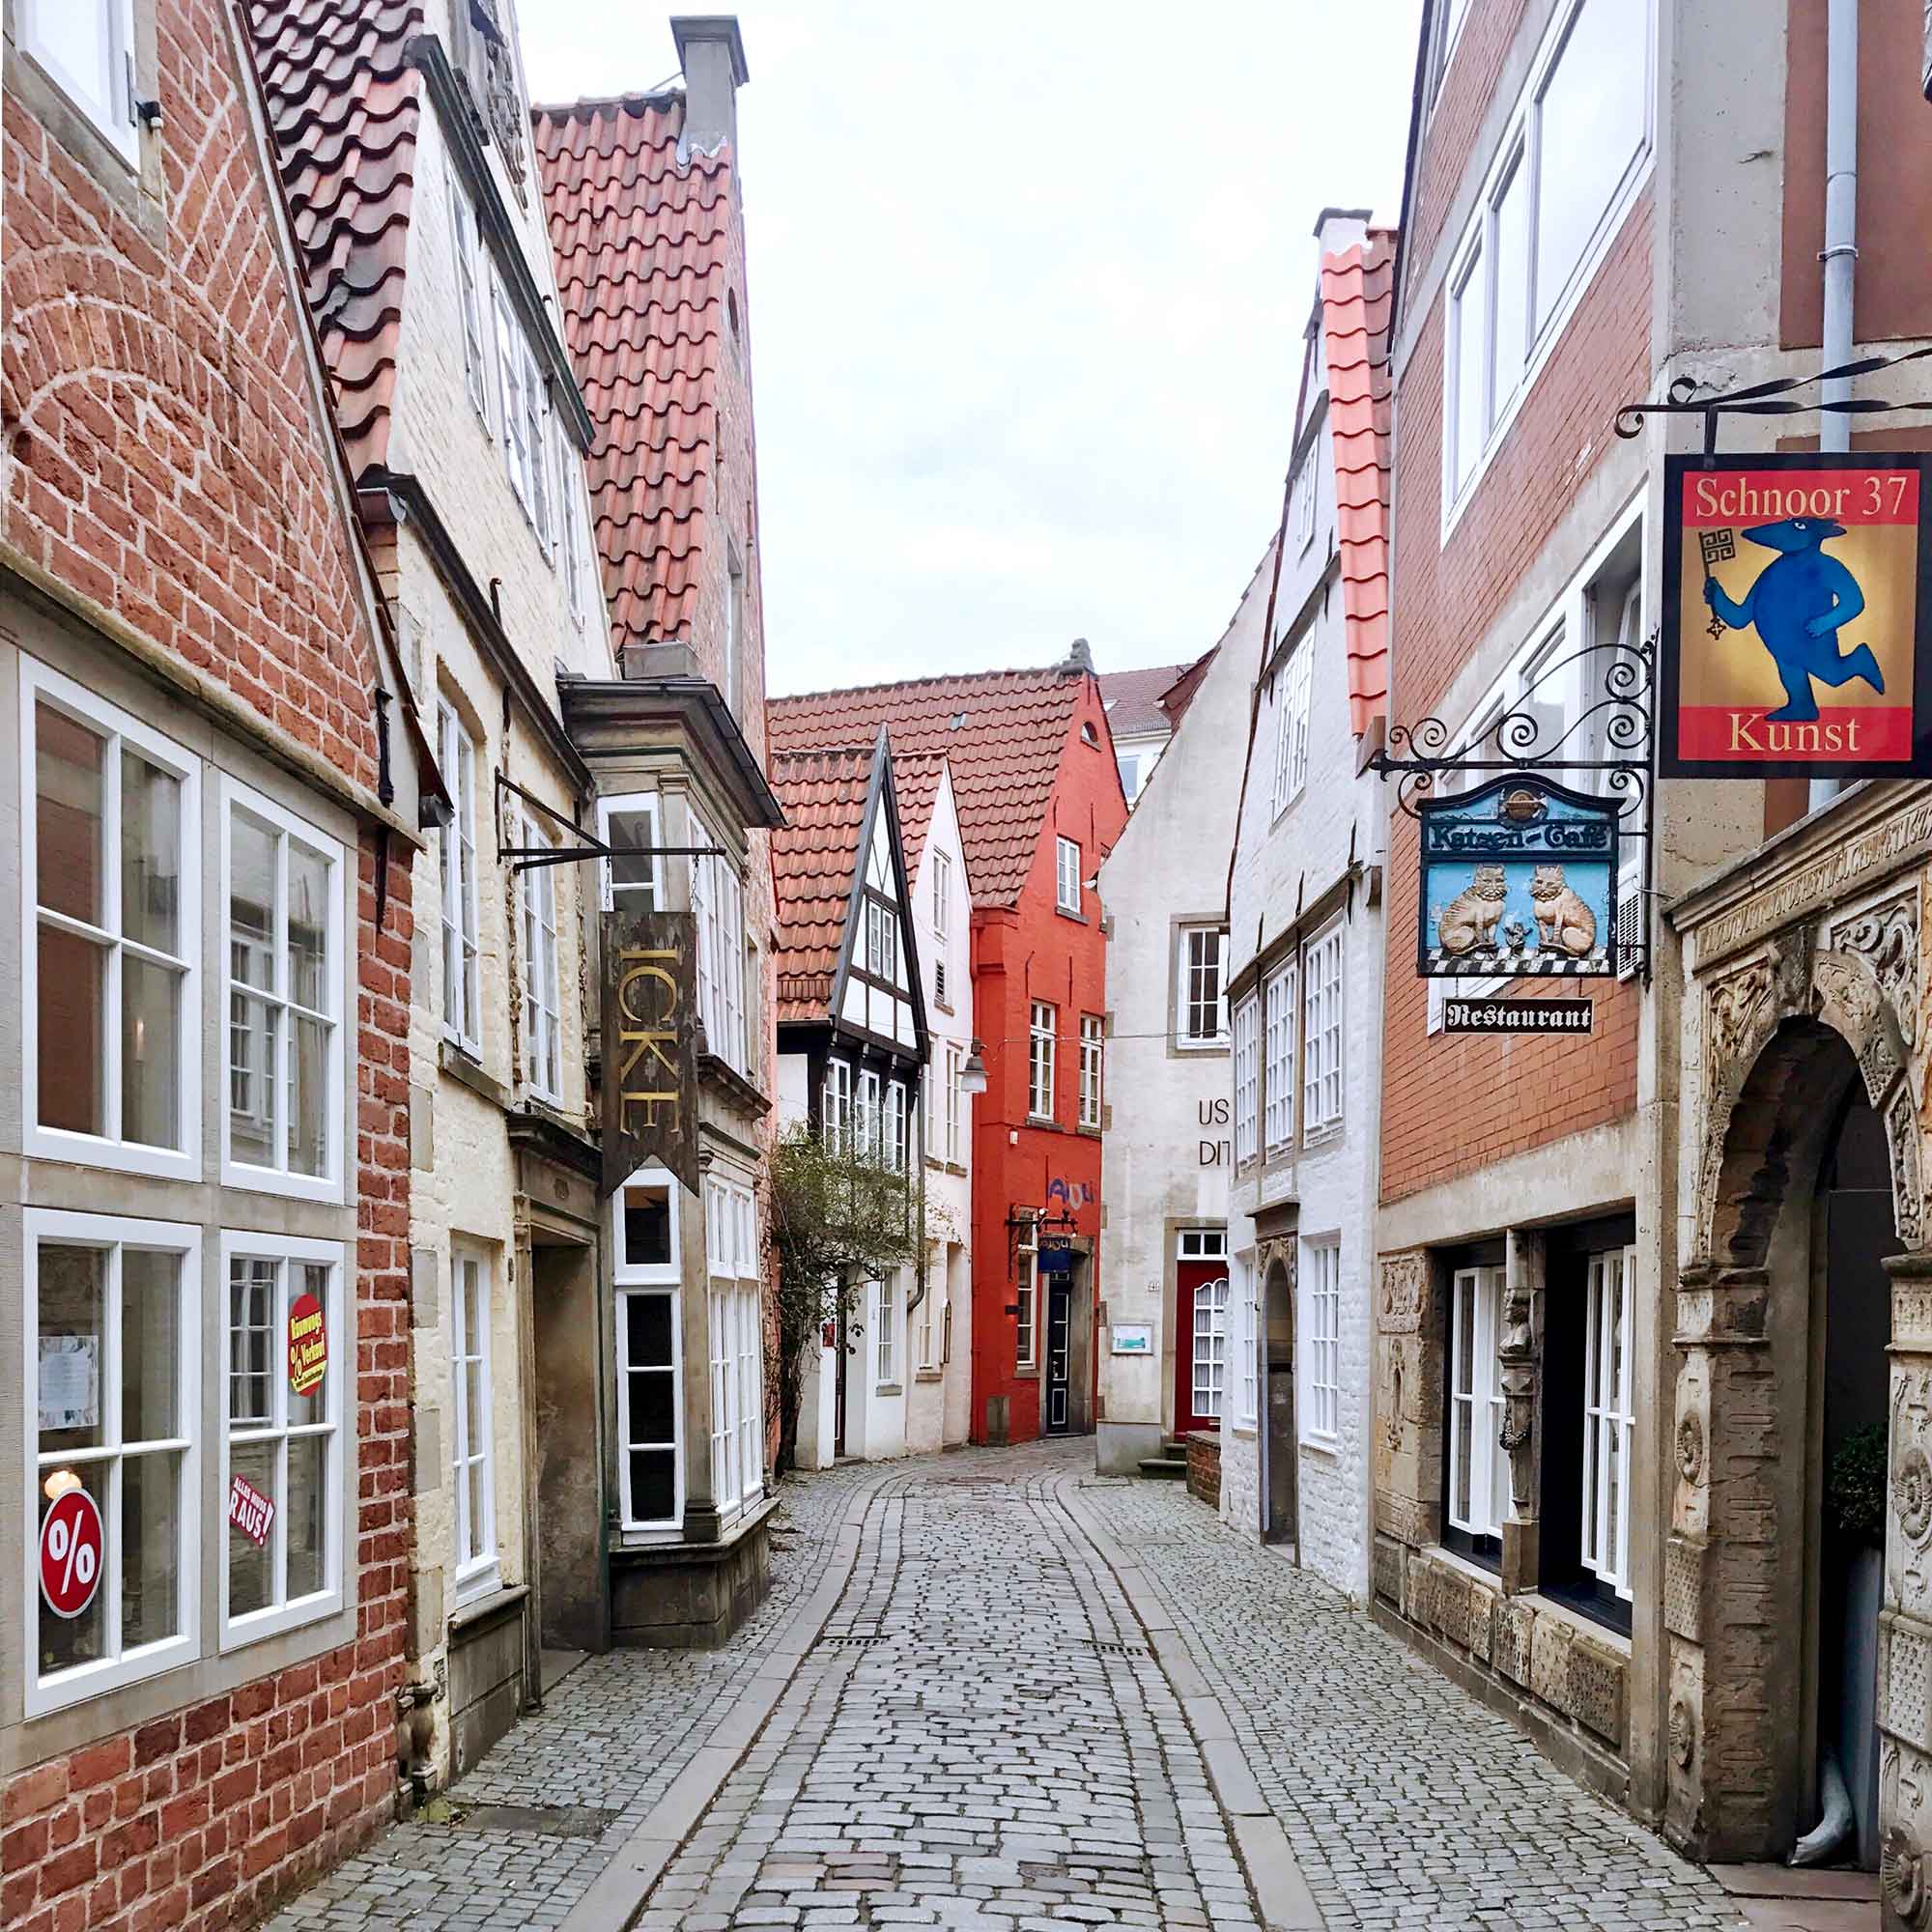 A small alley with old buildings in the Schnoor quarter in Bremen City